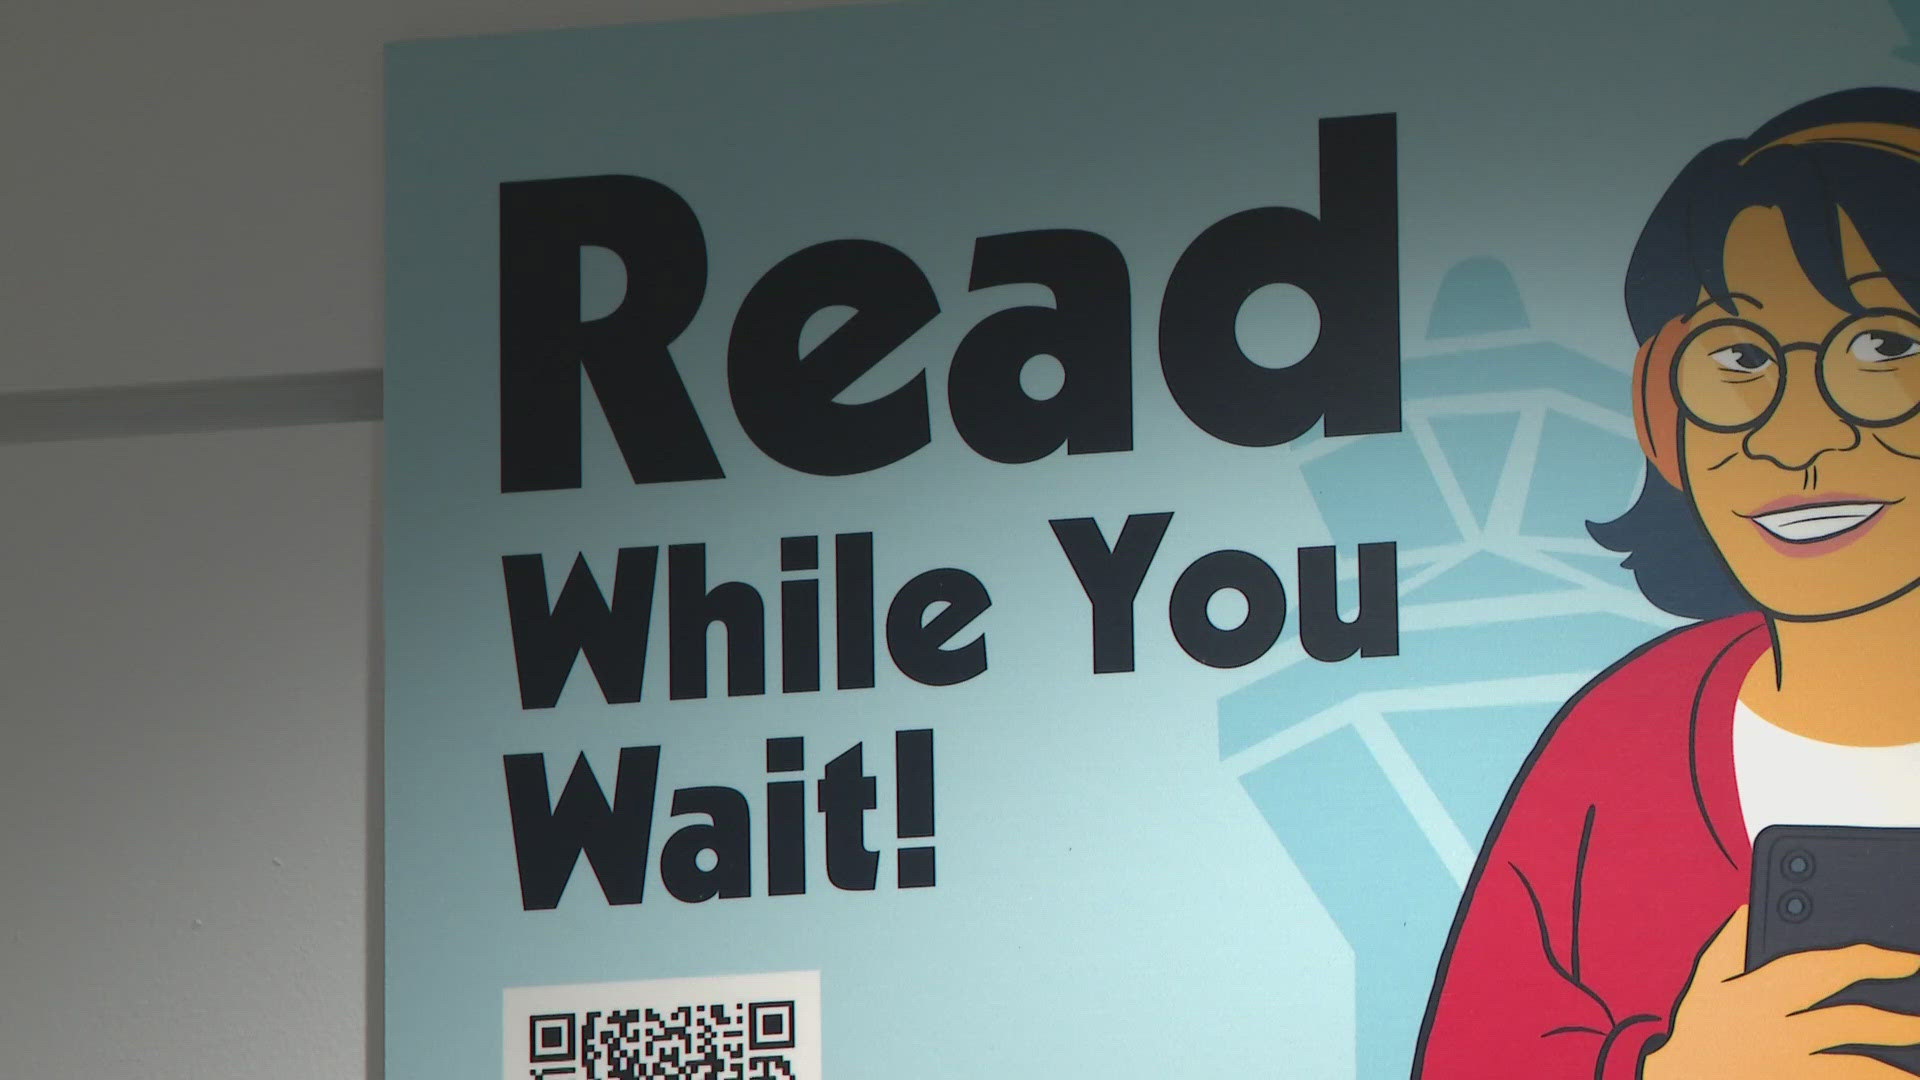 Have you ever been bored at the airport with nothing to do? A new program from the St. Louis County Library allows people to read e-books for free without the wait.